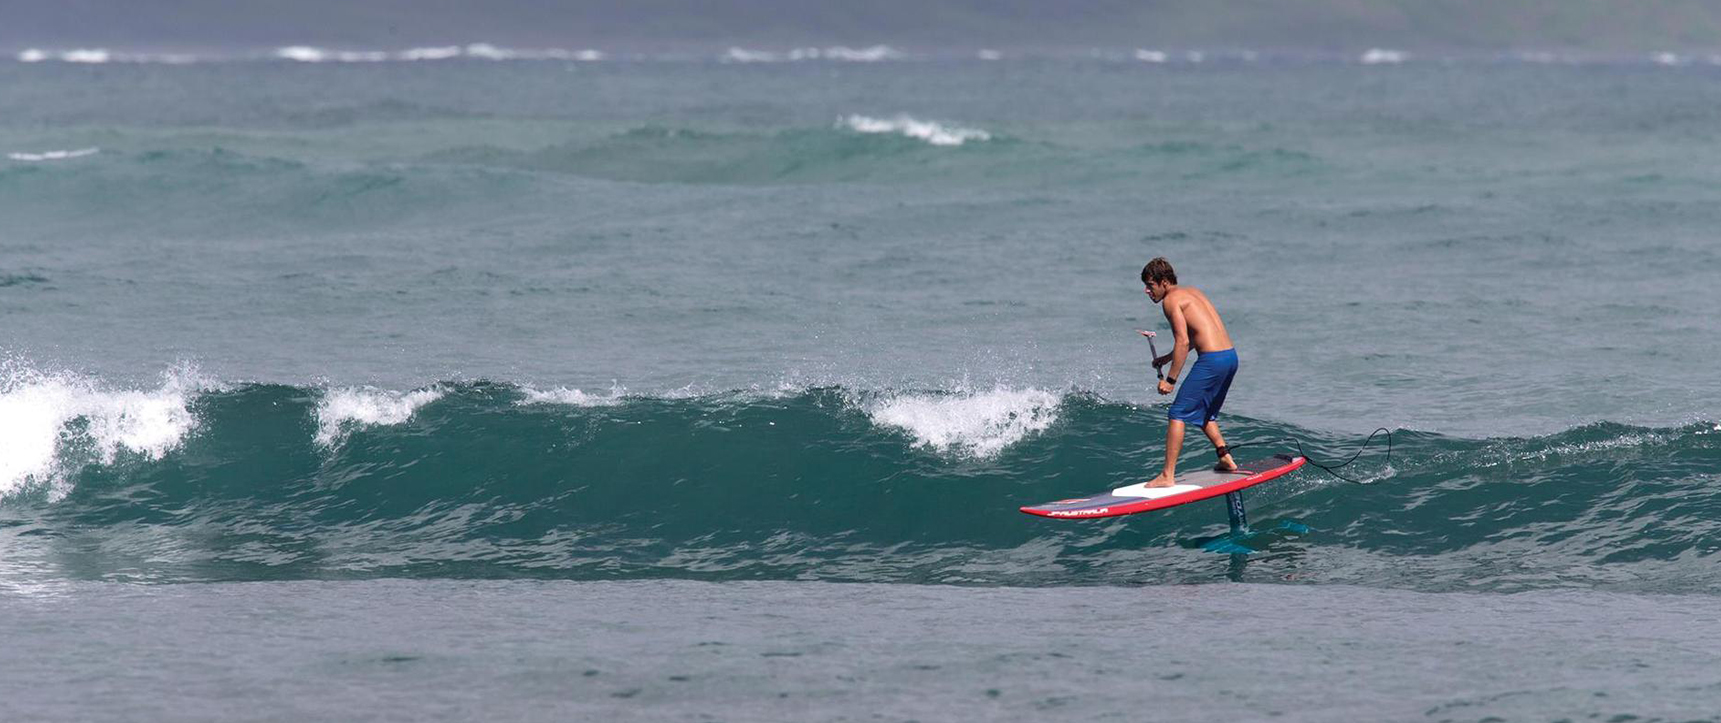 NP Glide Surf 2019 in Action